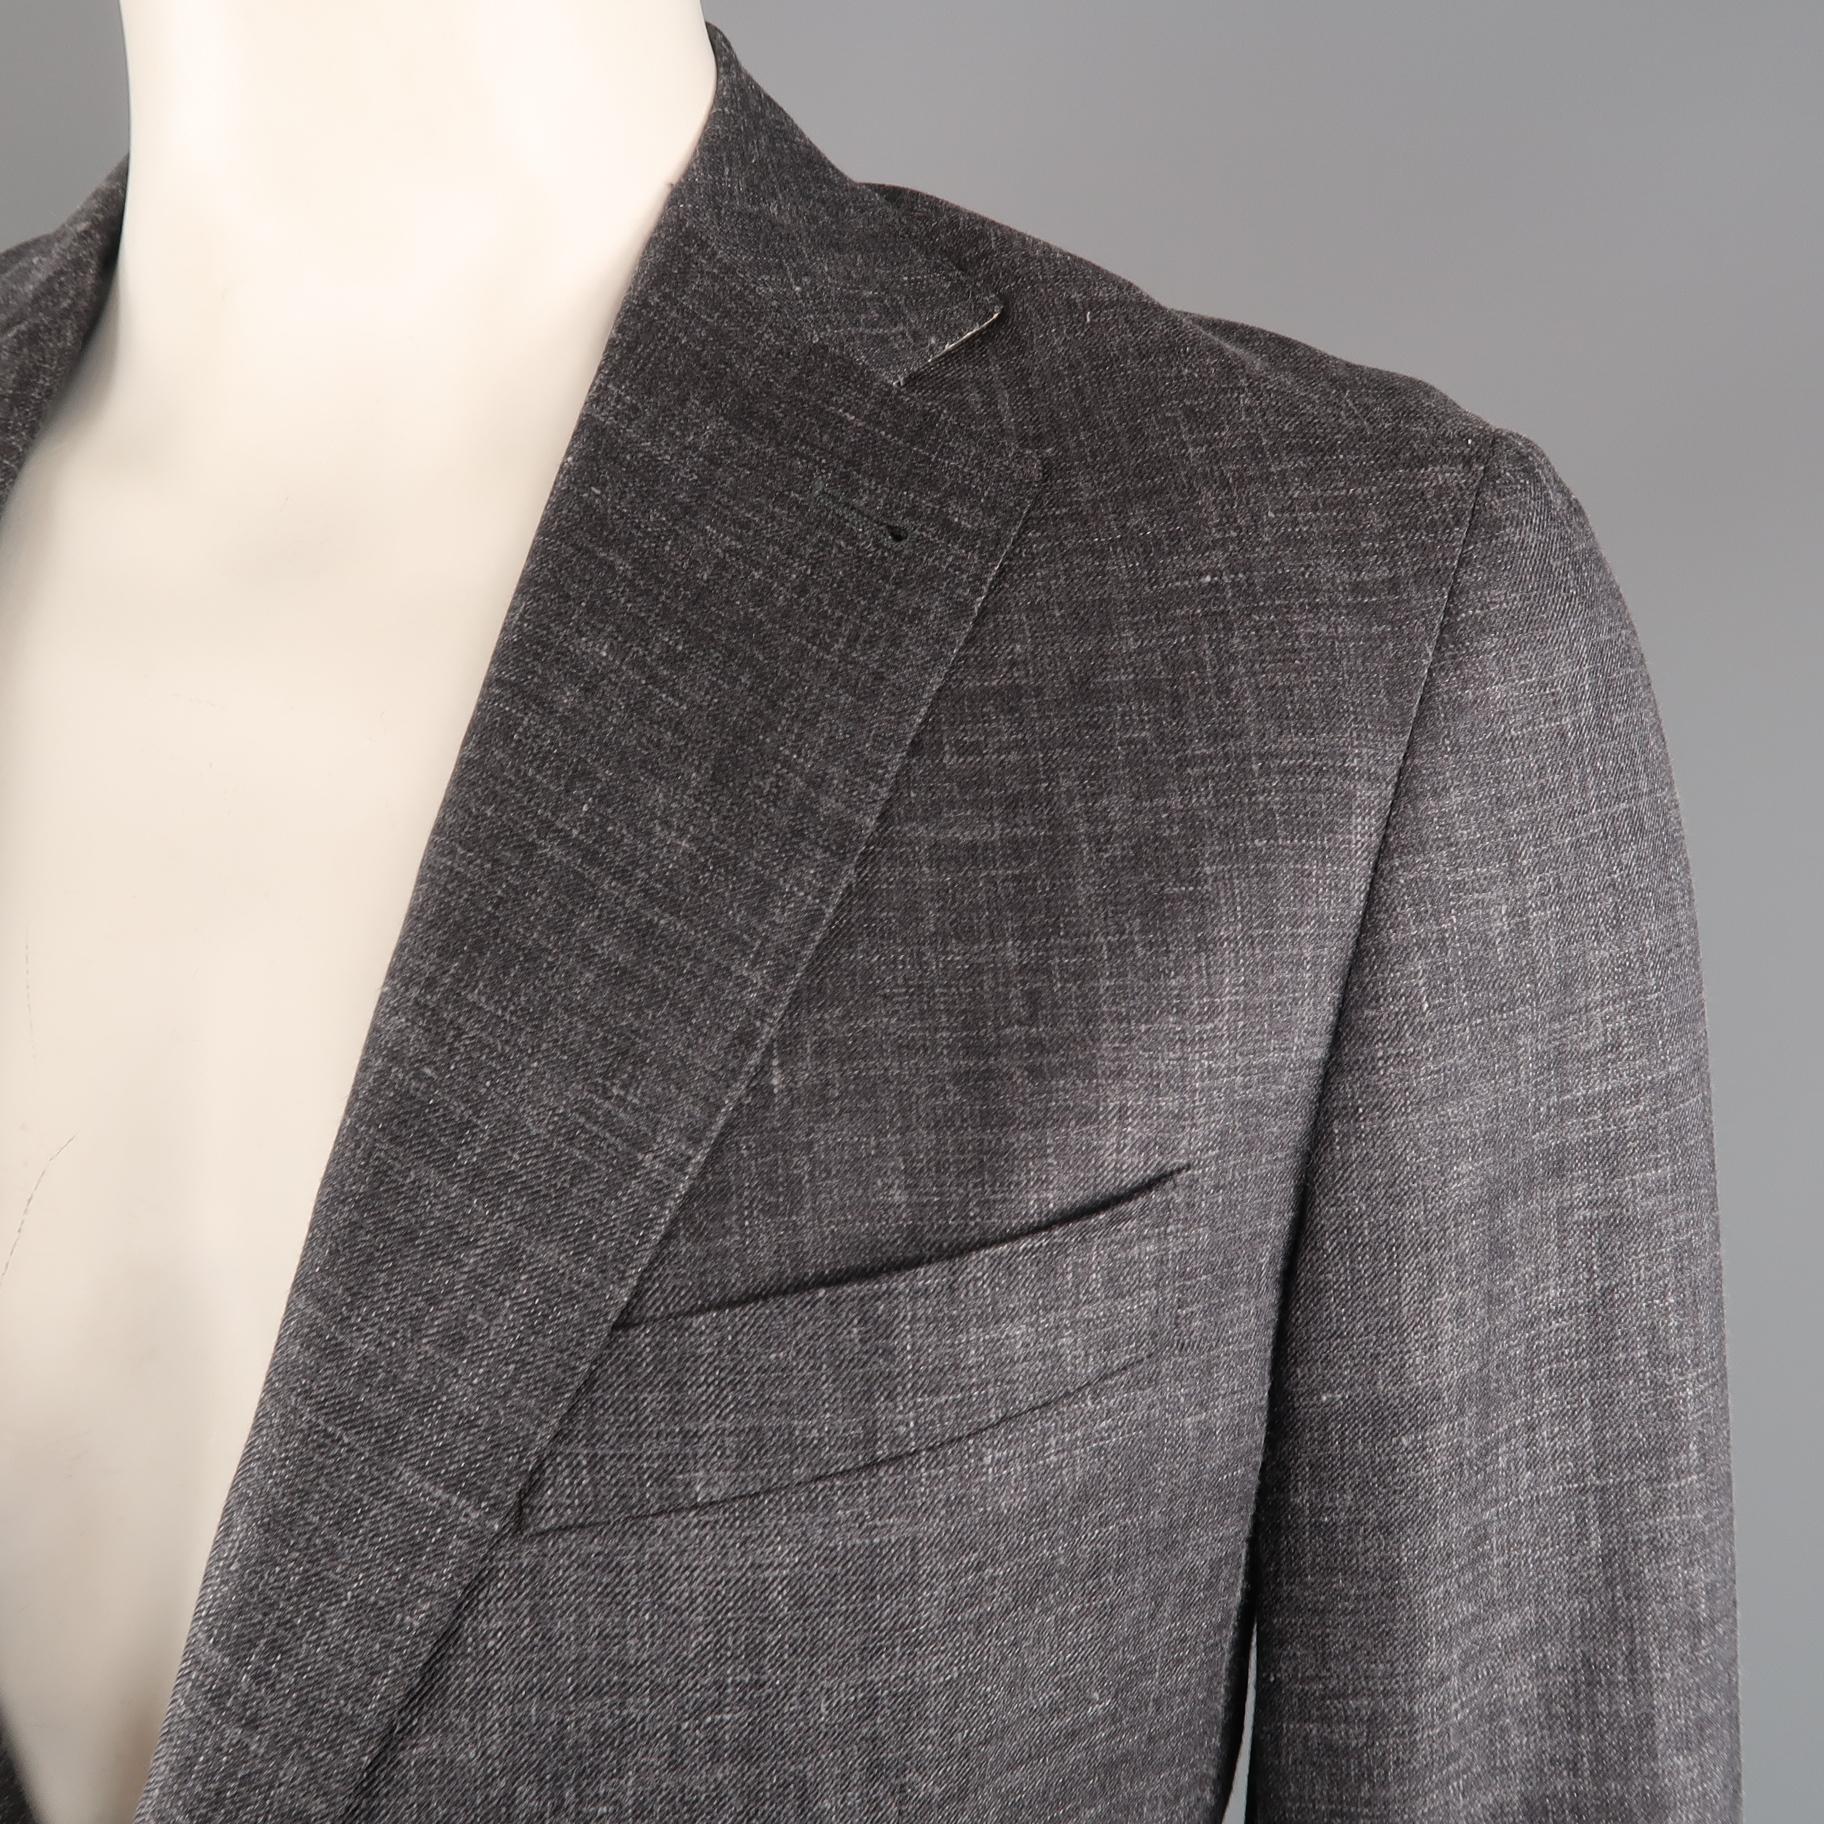 Single breasted CANALI sport coat jacket comes in a dark heather gray textured wool, silk, linen blend material with a wide notch lapel, two button front, and patch pockets. Made in Italy.
 
Excellent Pre-Owned Condition.
Marked: IT 52
